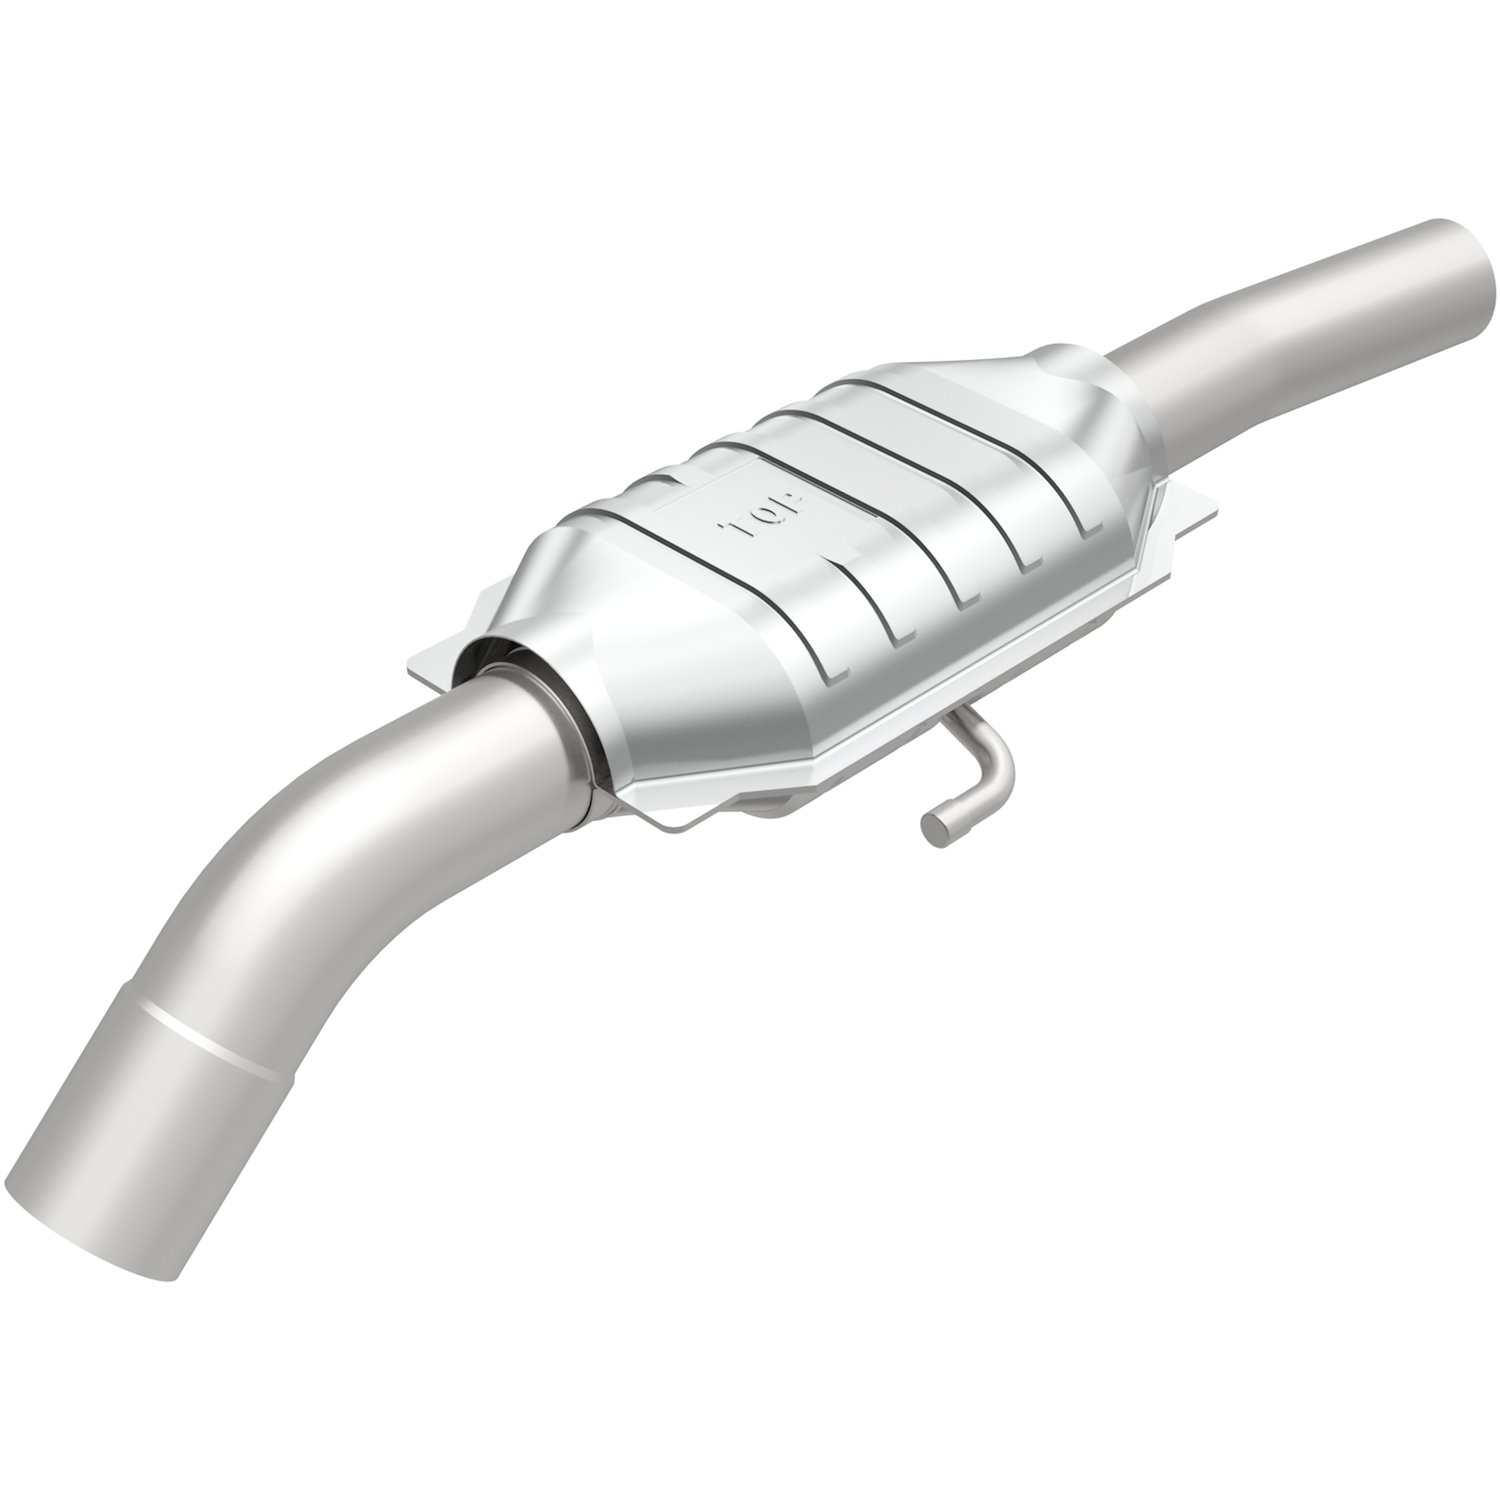 California Grade CARB Compliant Direct-Fit Catalytic Converter 3391290